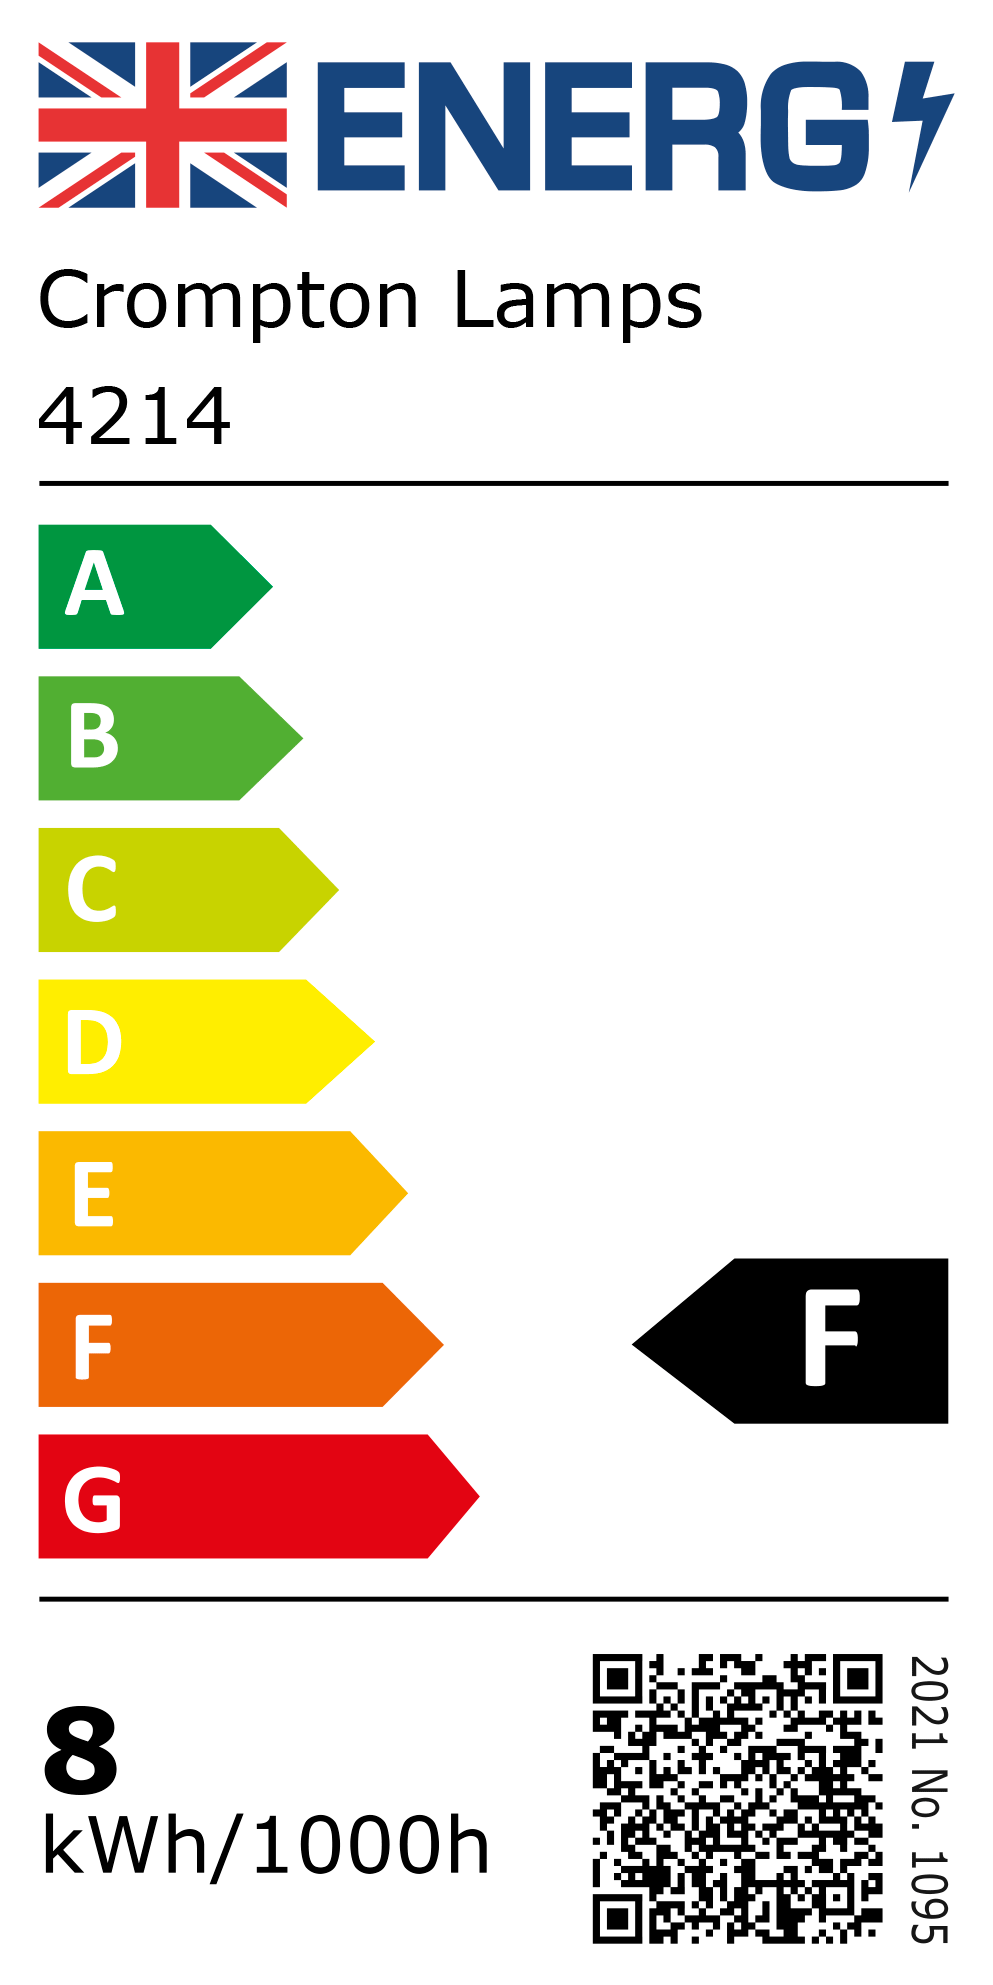 New 2021 Energy Rating Label: Stock Code 4214